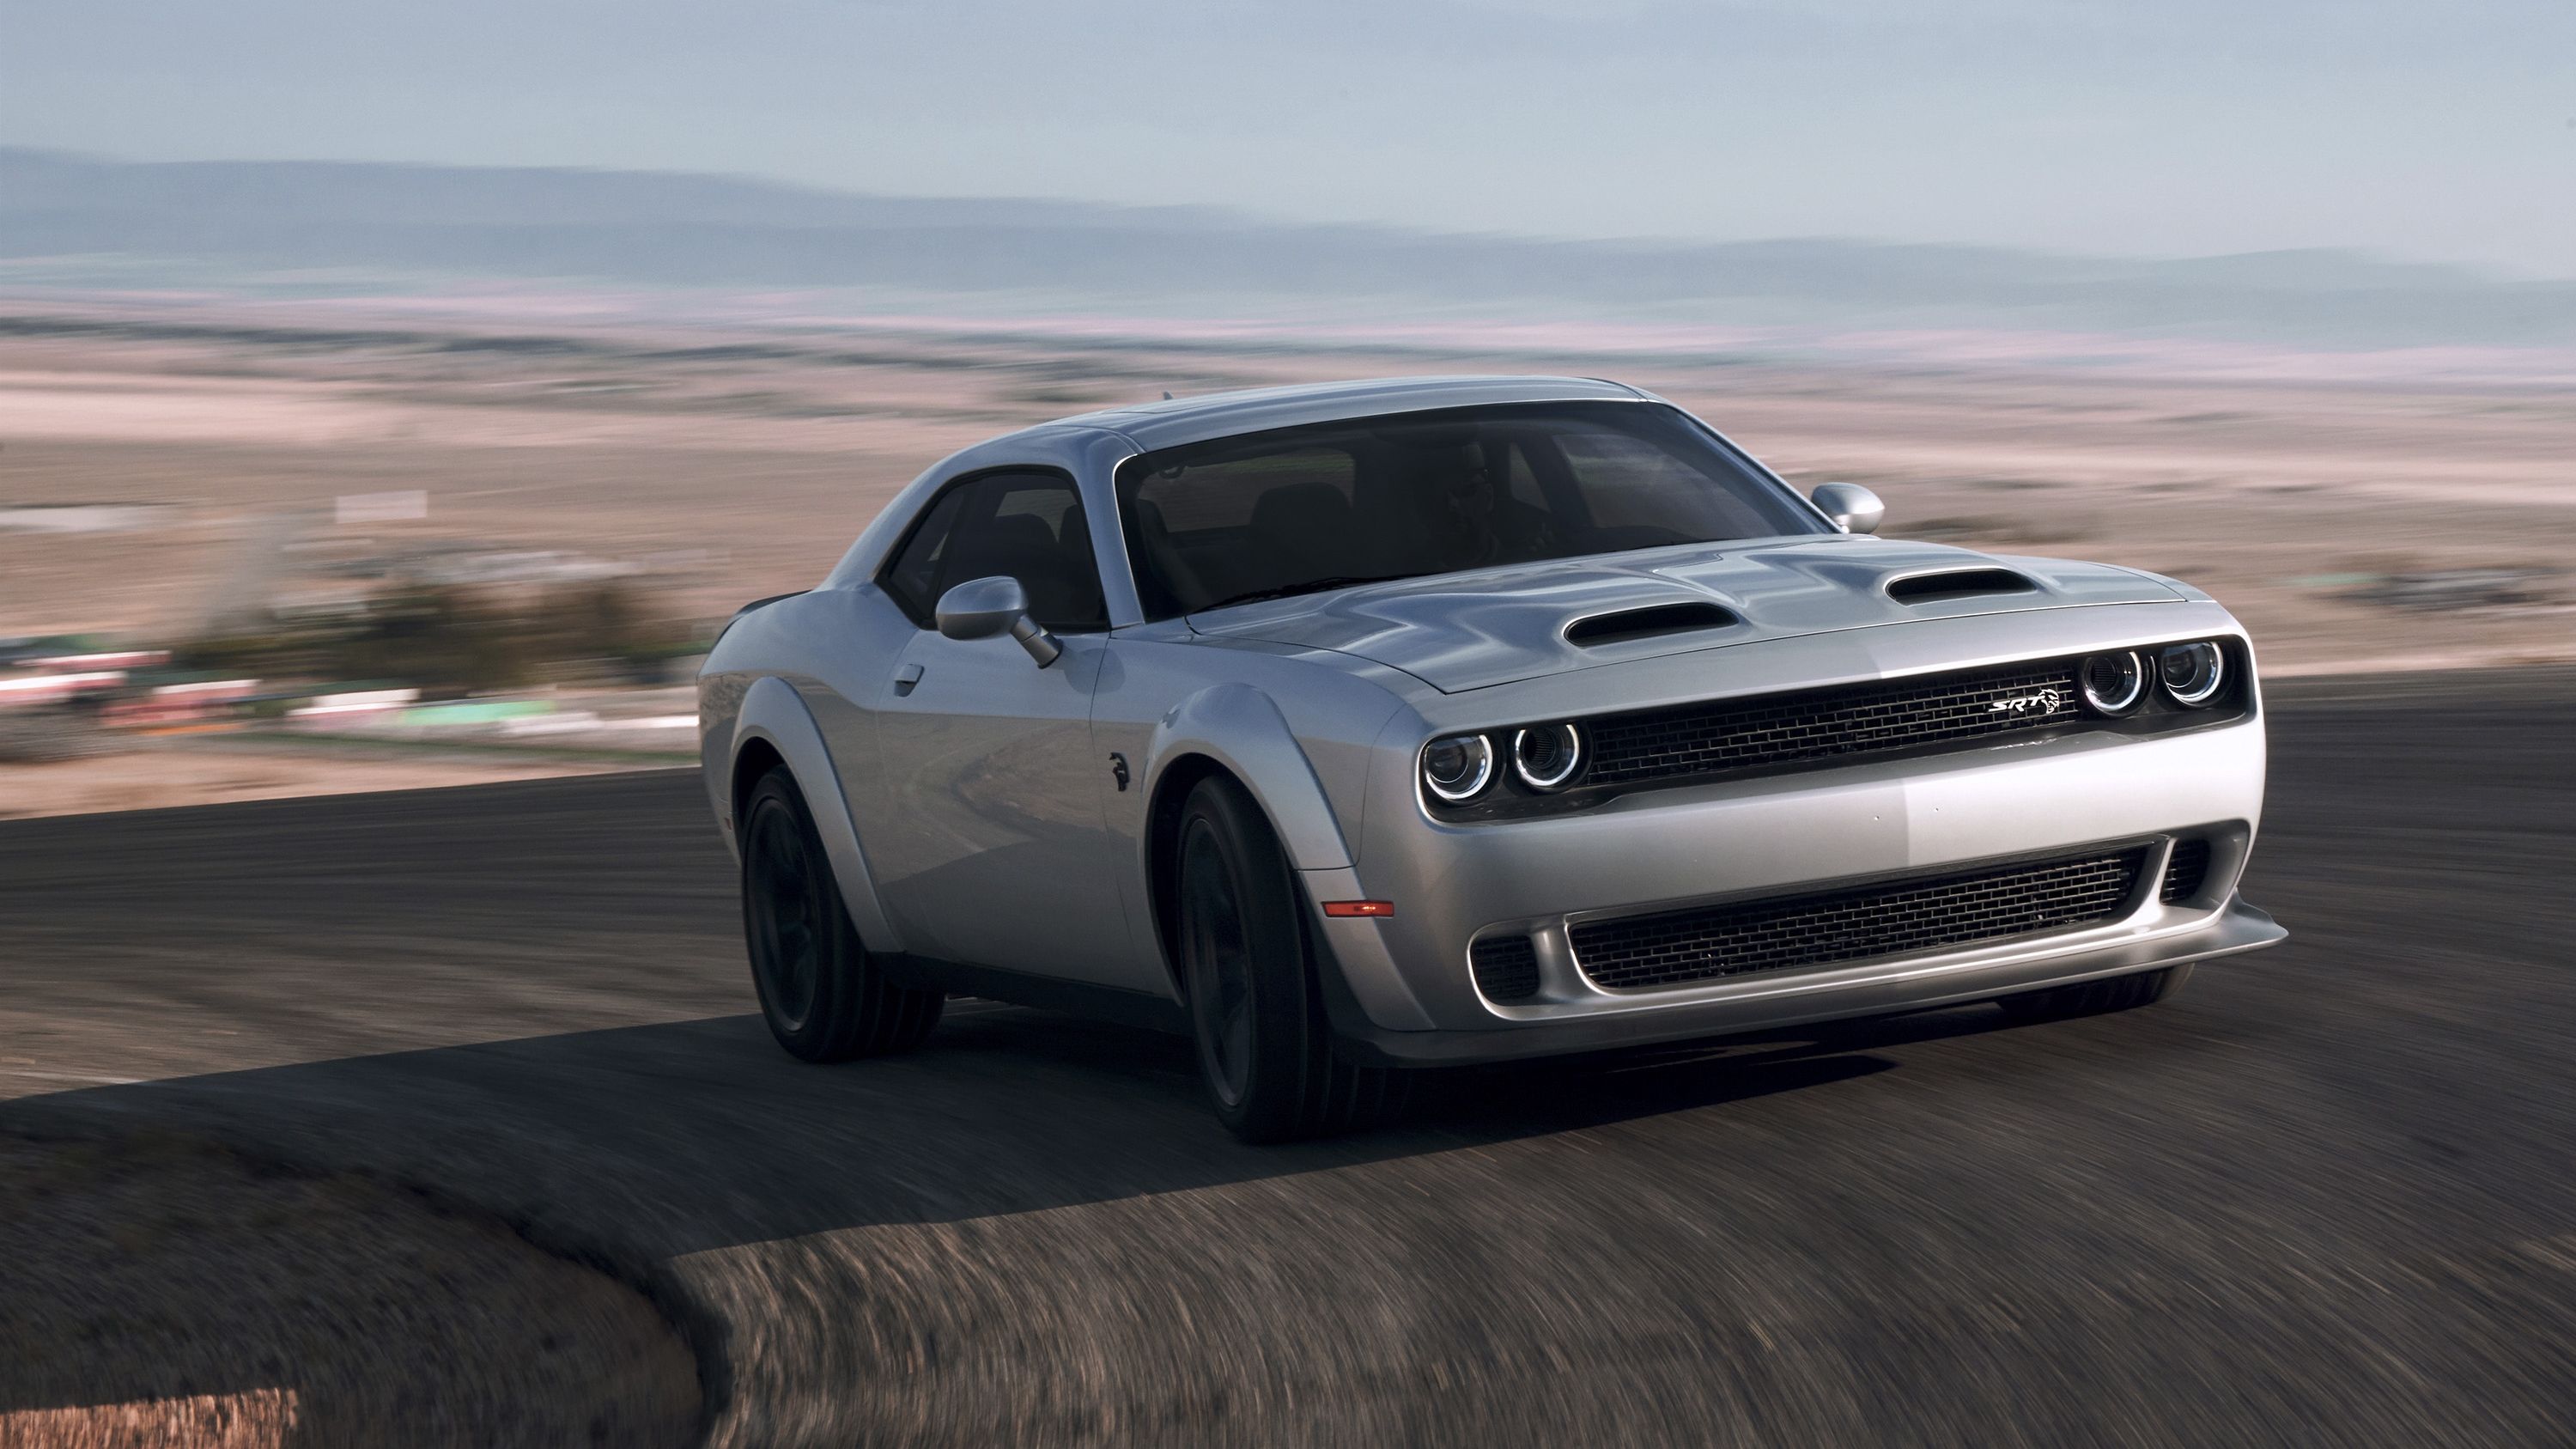 Unleash the Speed: Top 10 High-Performance Cars for Thrill-Seekers - Dodge Challenger SRT Hellcat Redeye: Muscle car meets high-performance